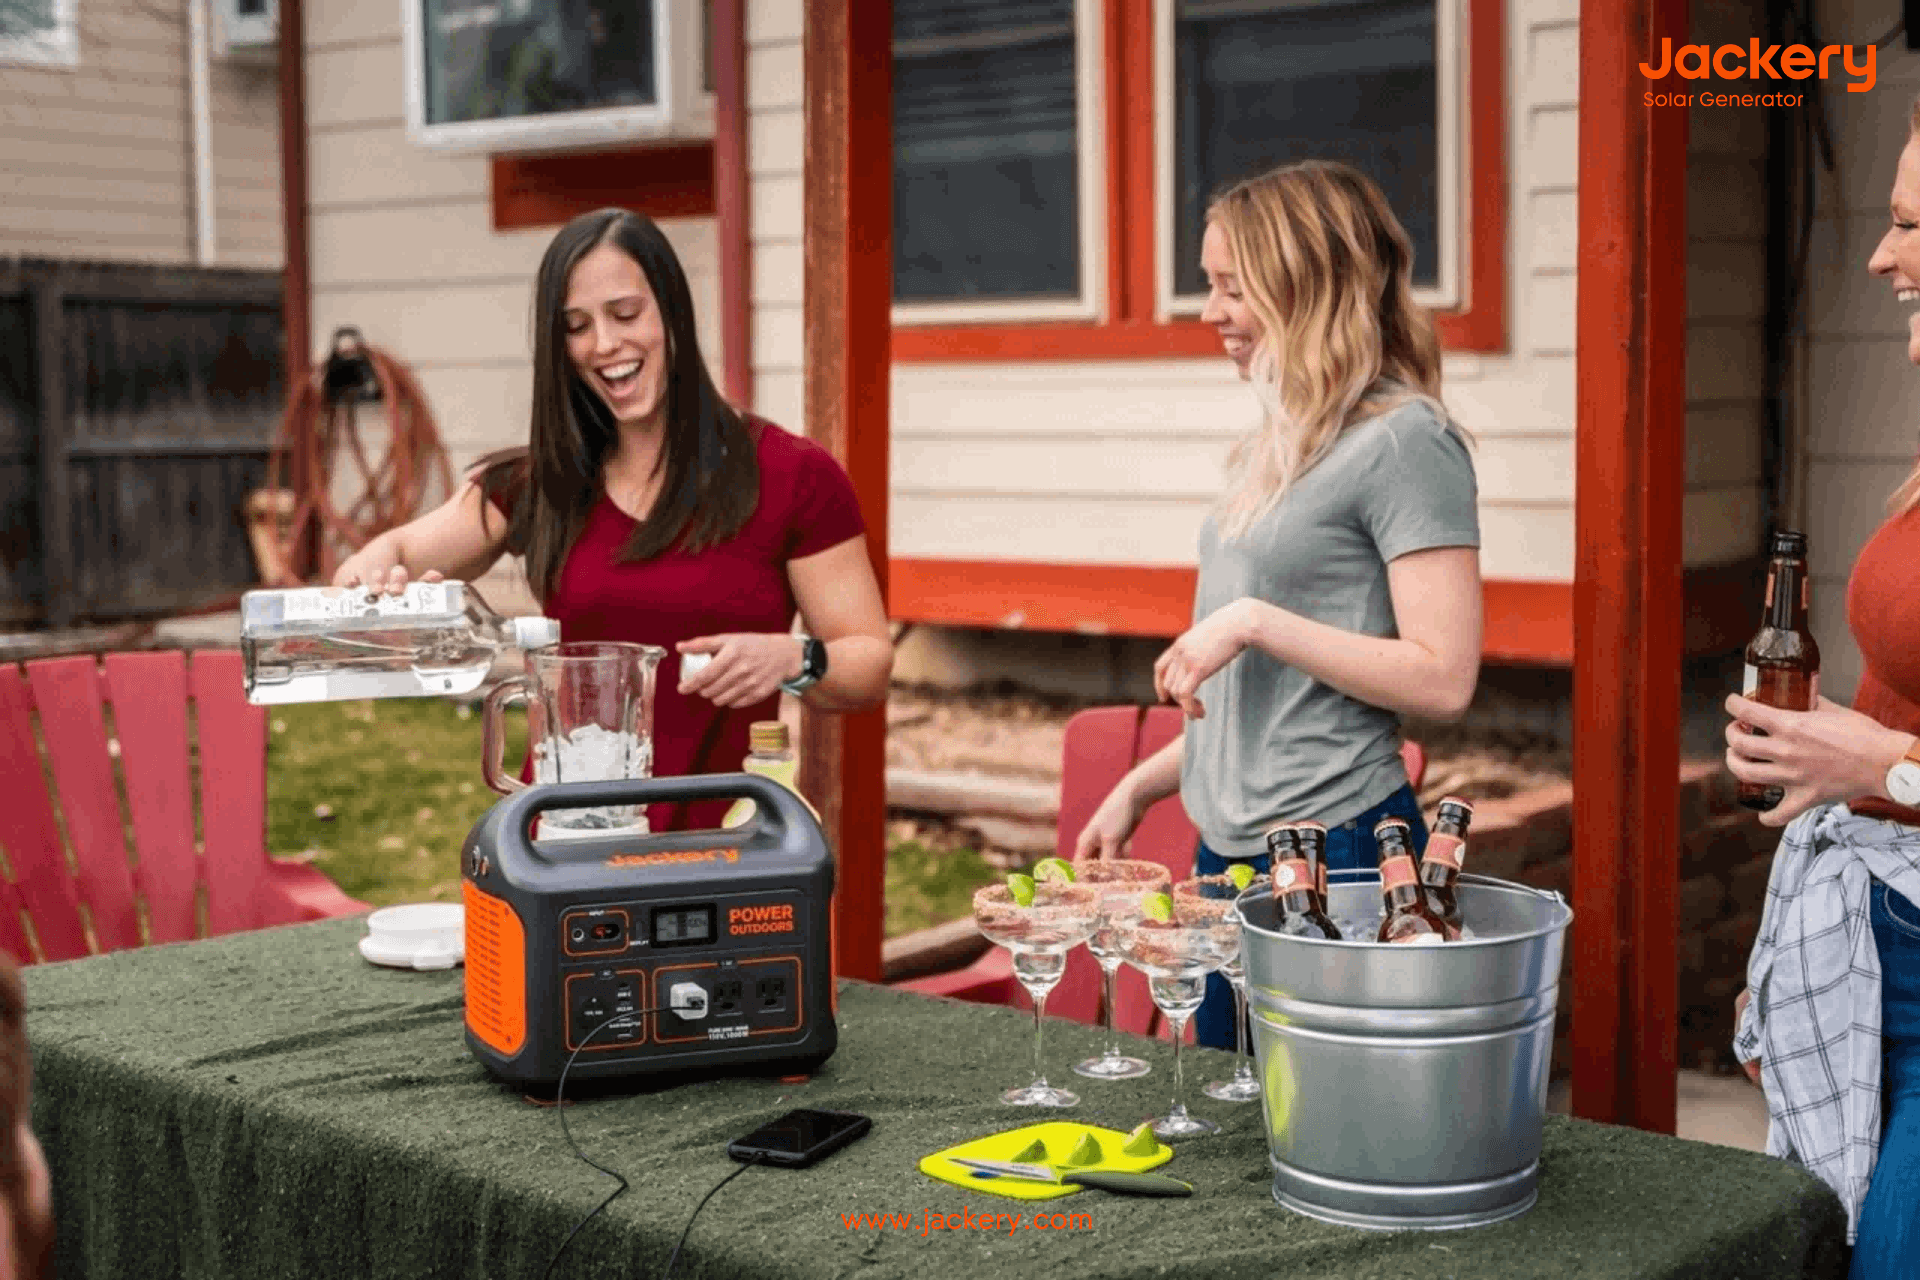 Jackery solar generator for tailgate party